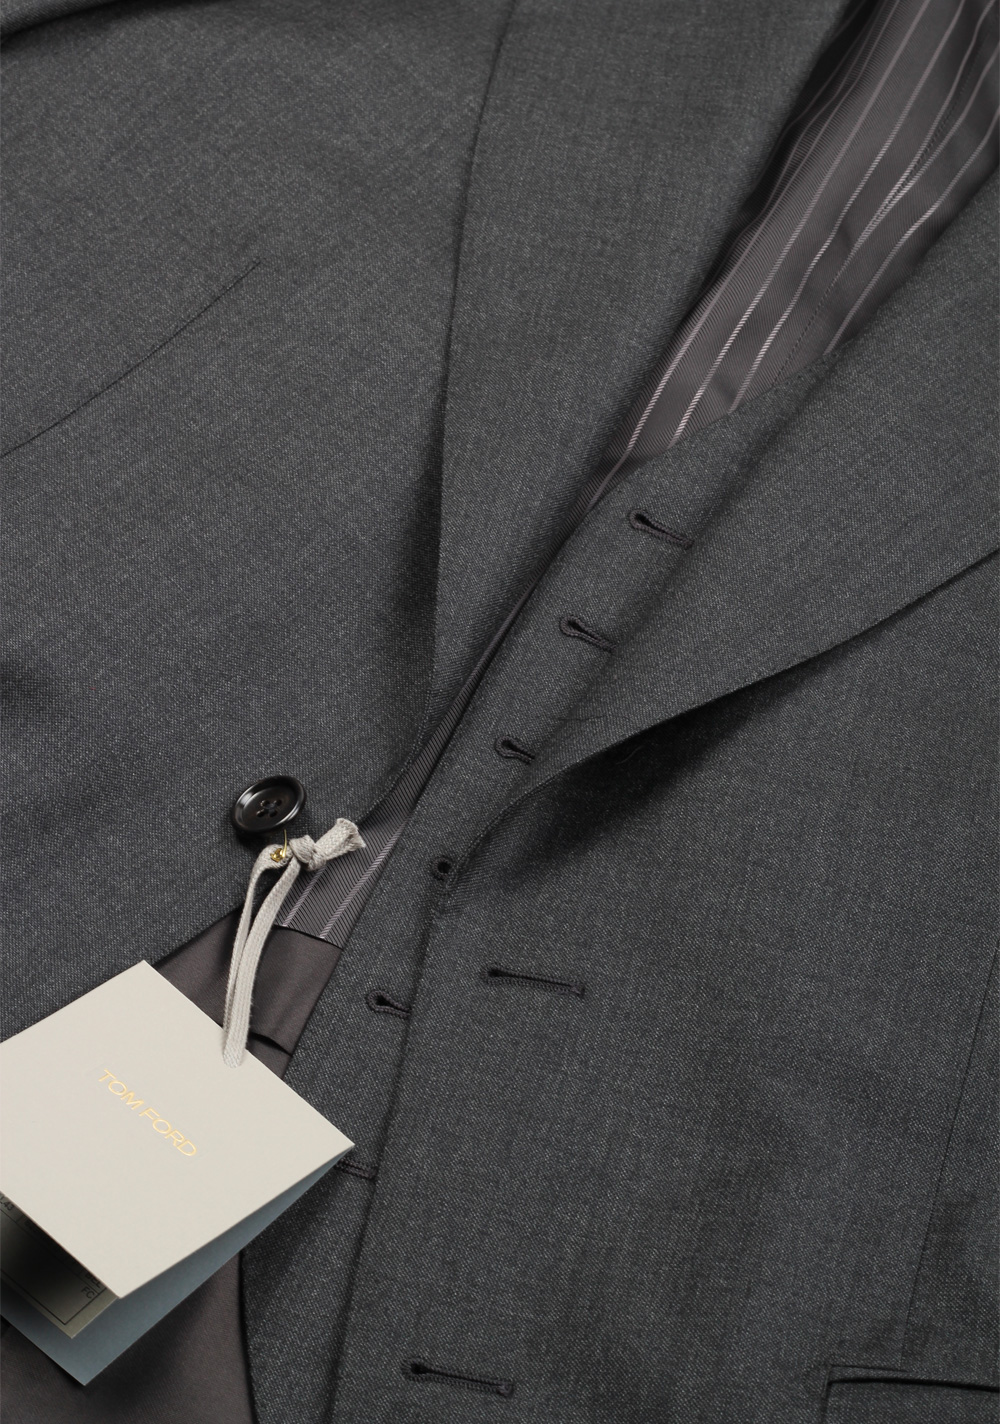 TOM FORD Windsor Gray 3 Piece Suit Size 46 / 36R U.S. Wool Fit A | Costume Limité